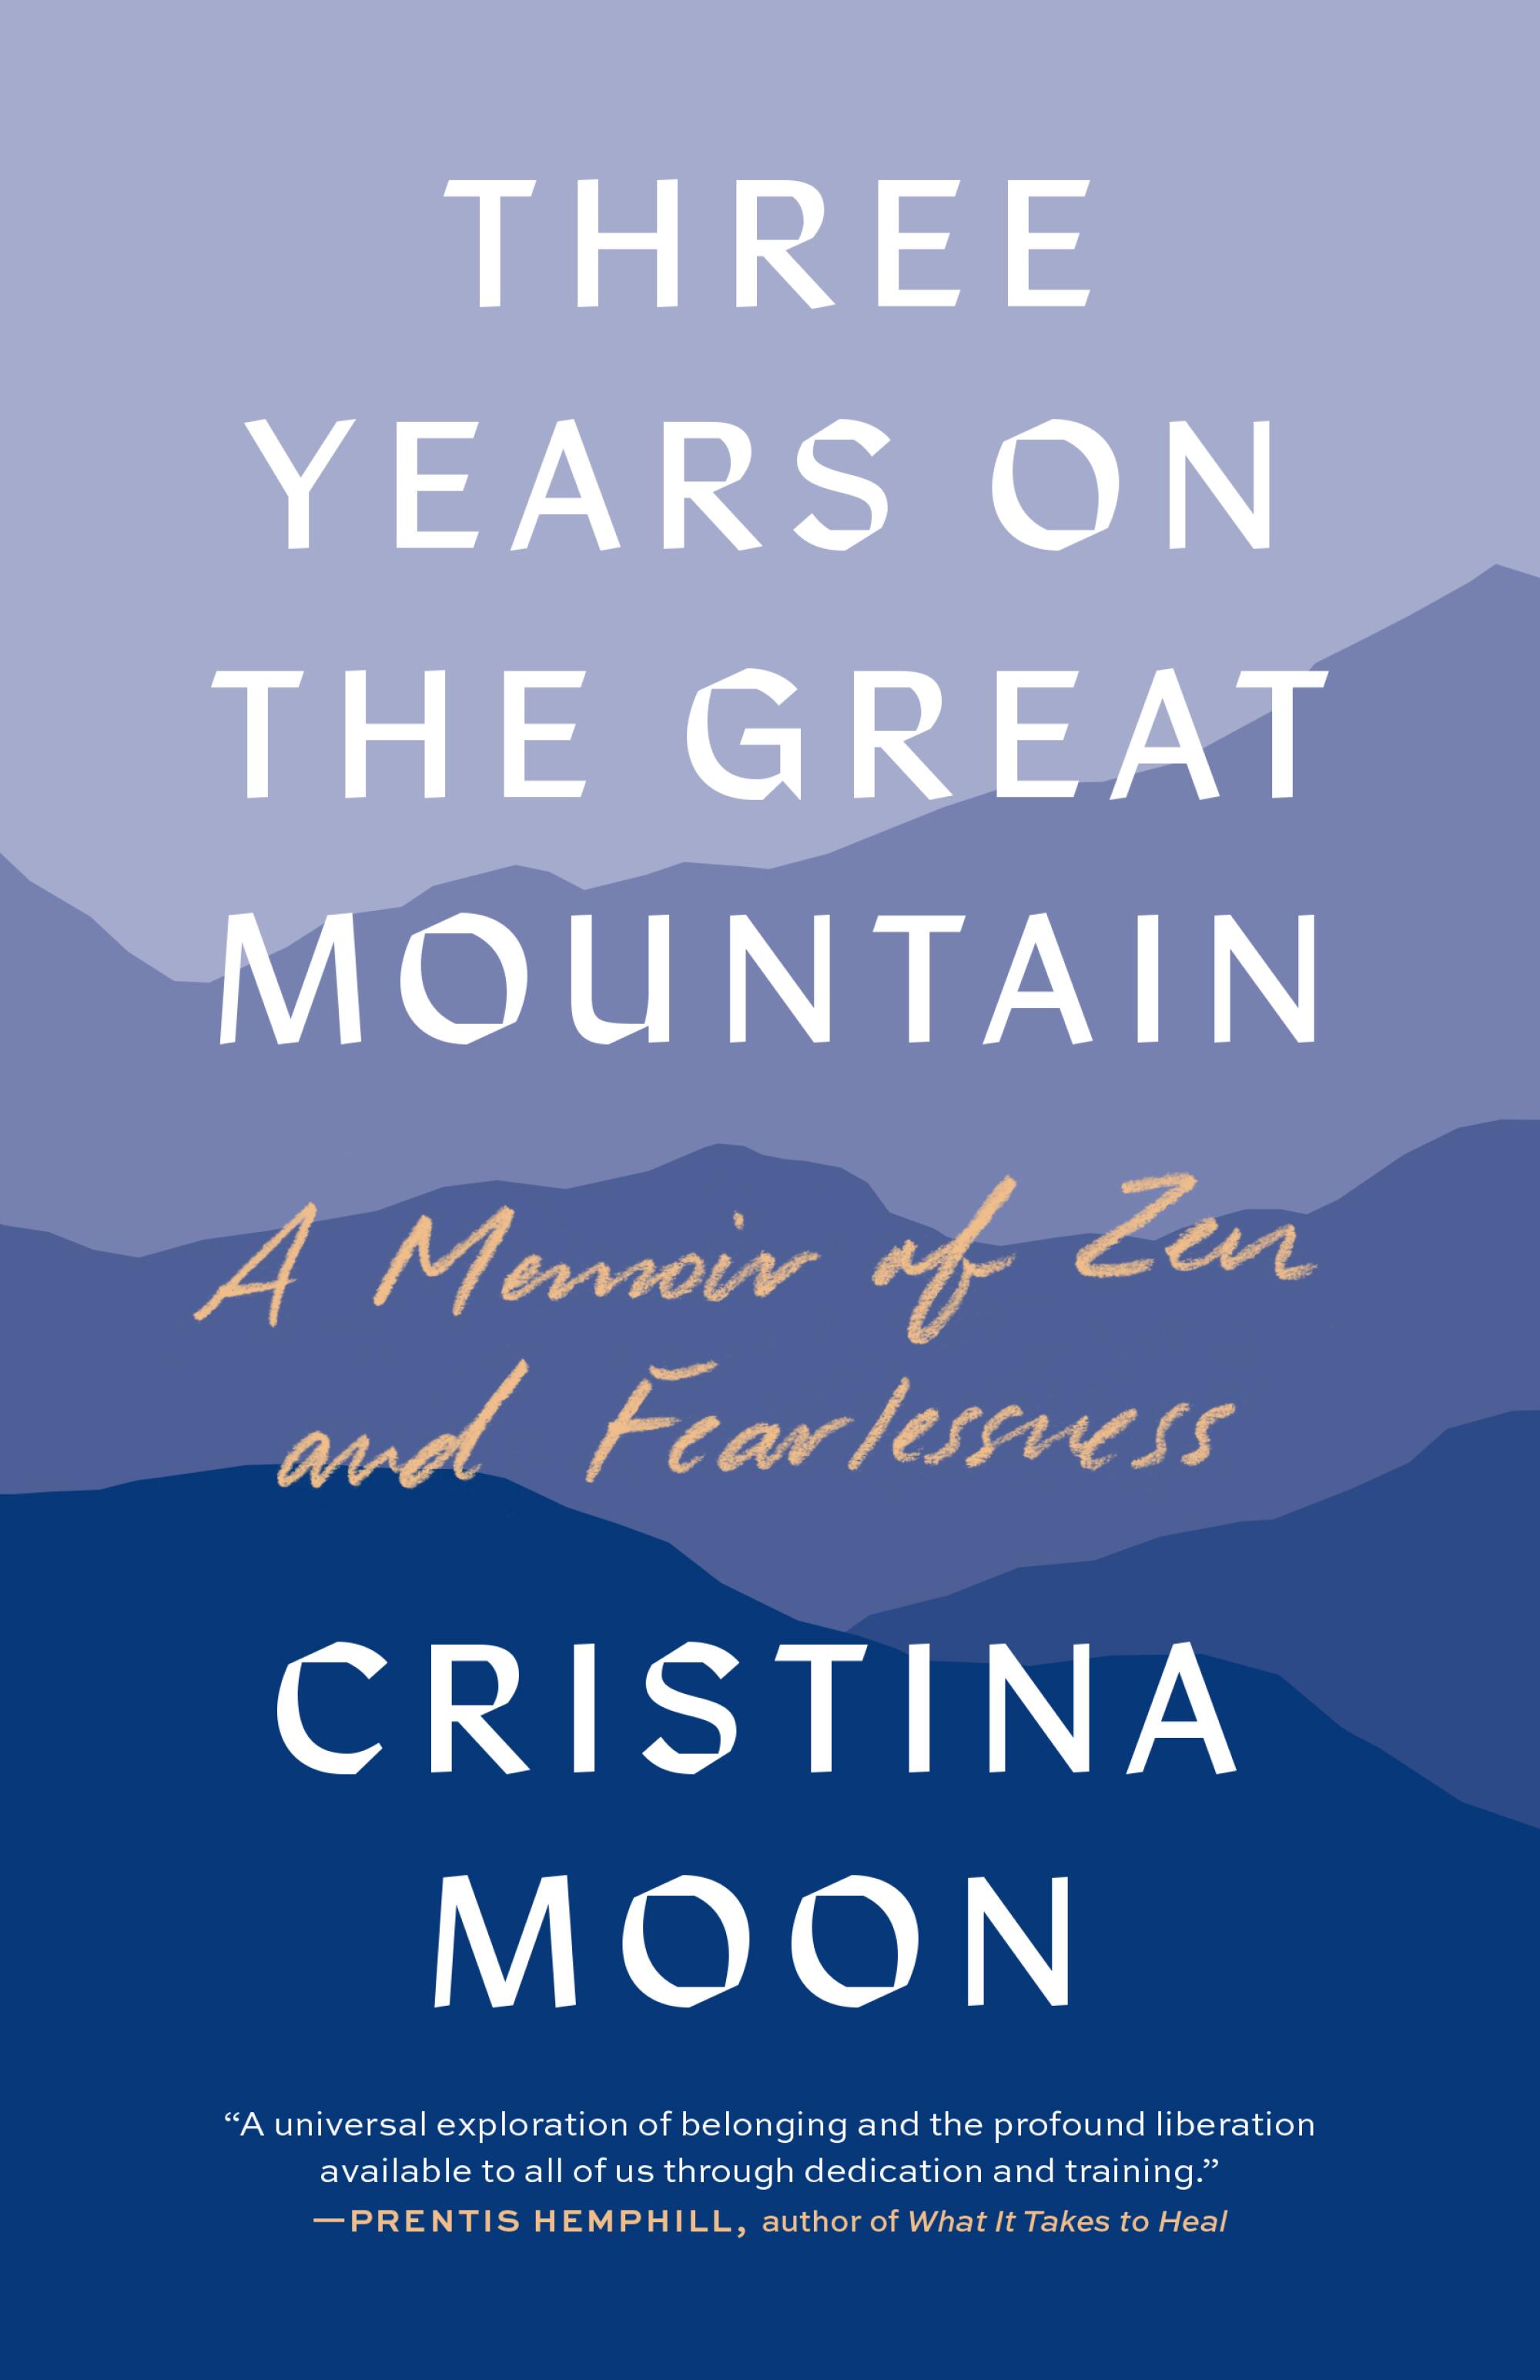 Book jacket for "Three Years on The Great Mountain A Memoir of Zen and Fearlessness" by Cristina Moon